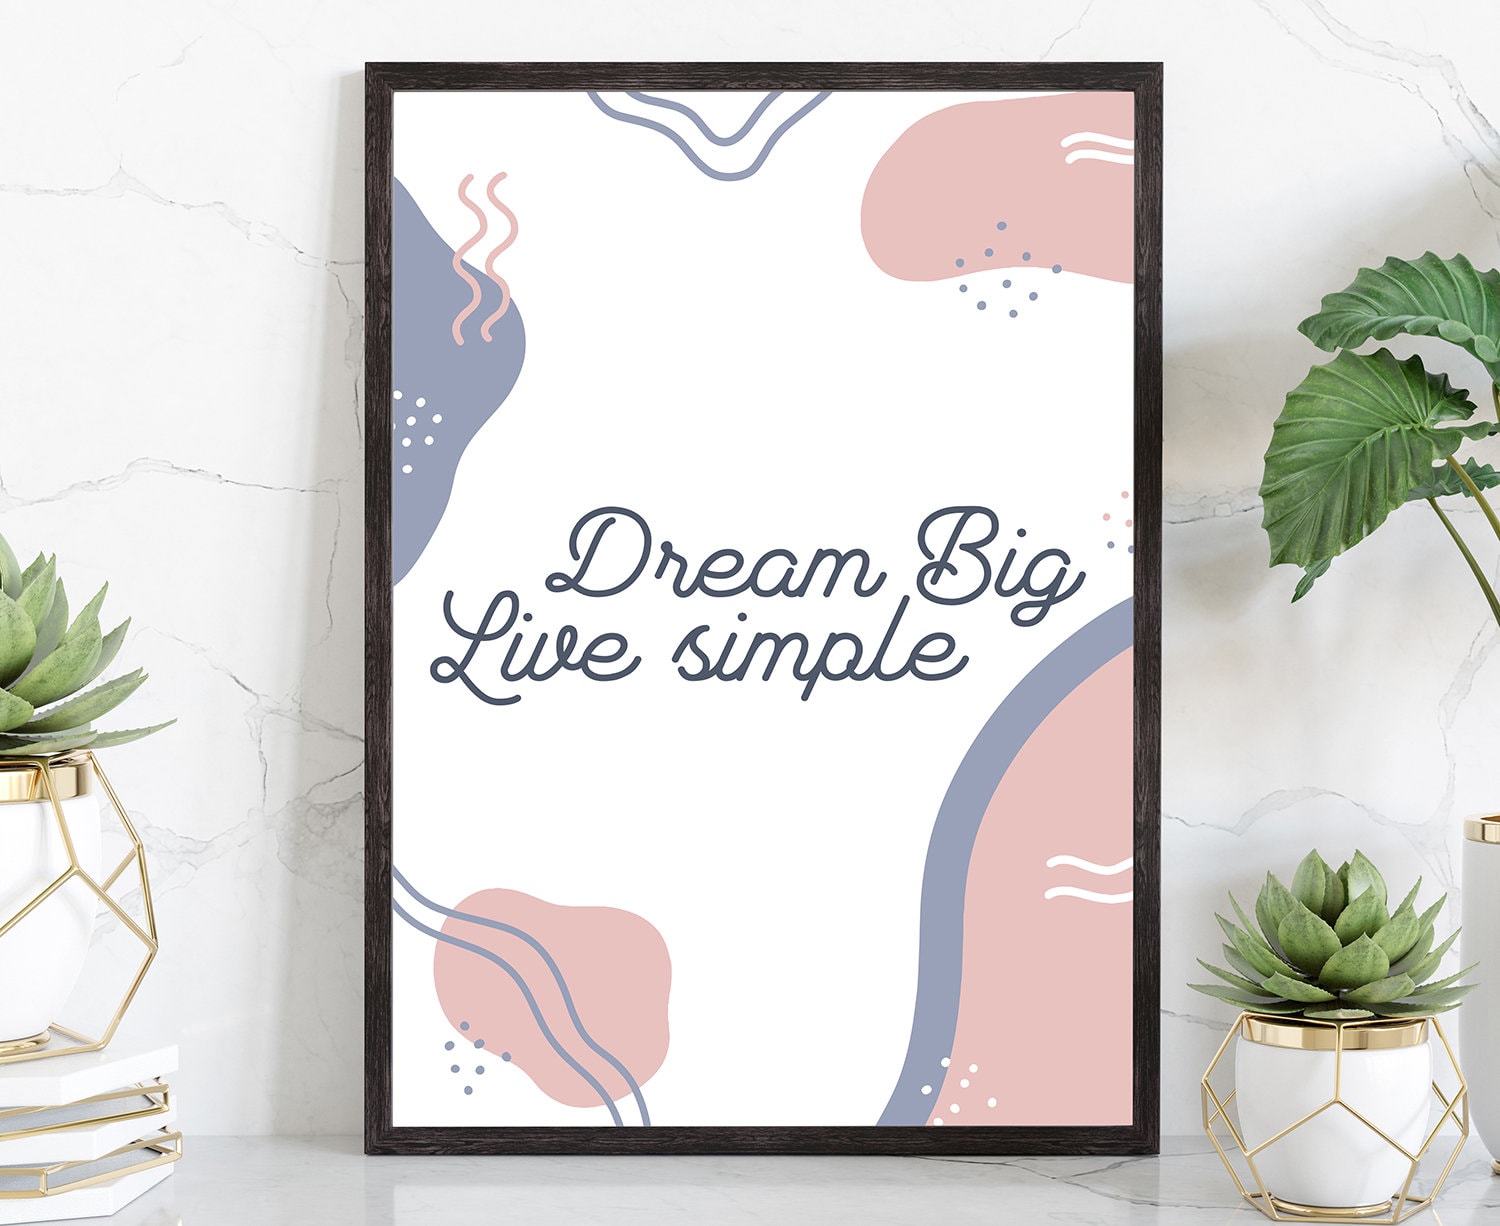 Dream Big Live Simple, Poster Prints, Modern Poster prints, Home wall Art Prints, Dorm Rooms wall art, Office wall decor, Motivational quote